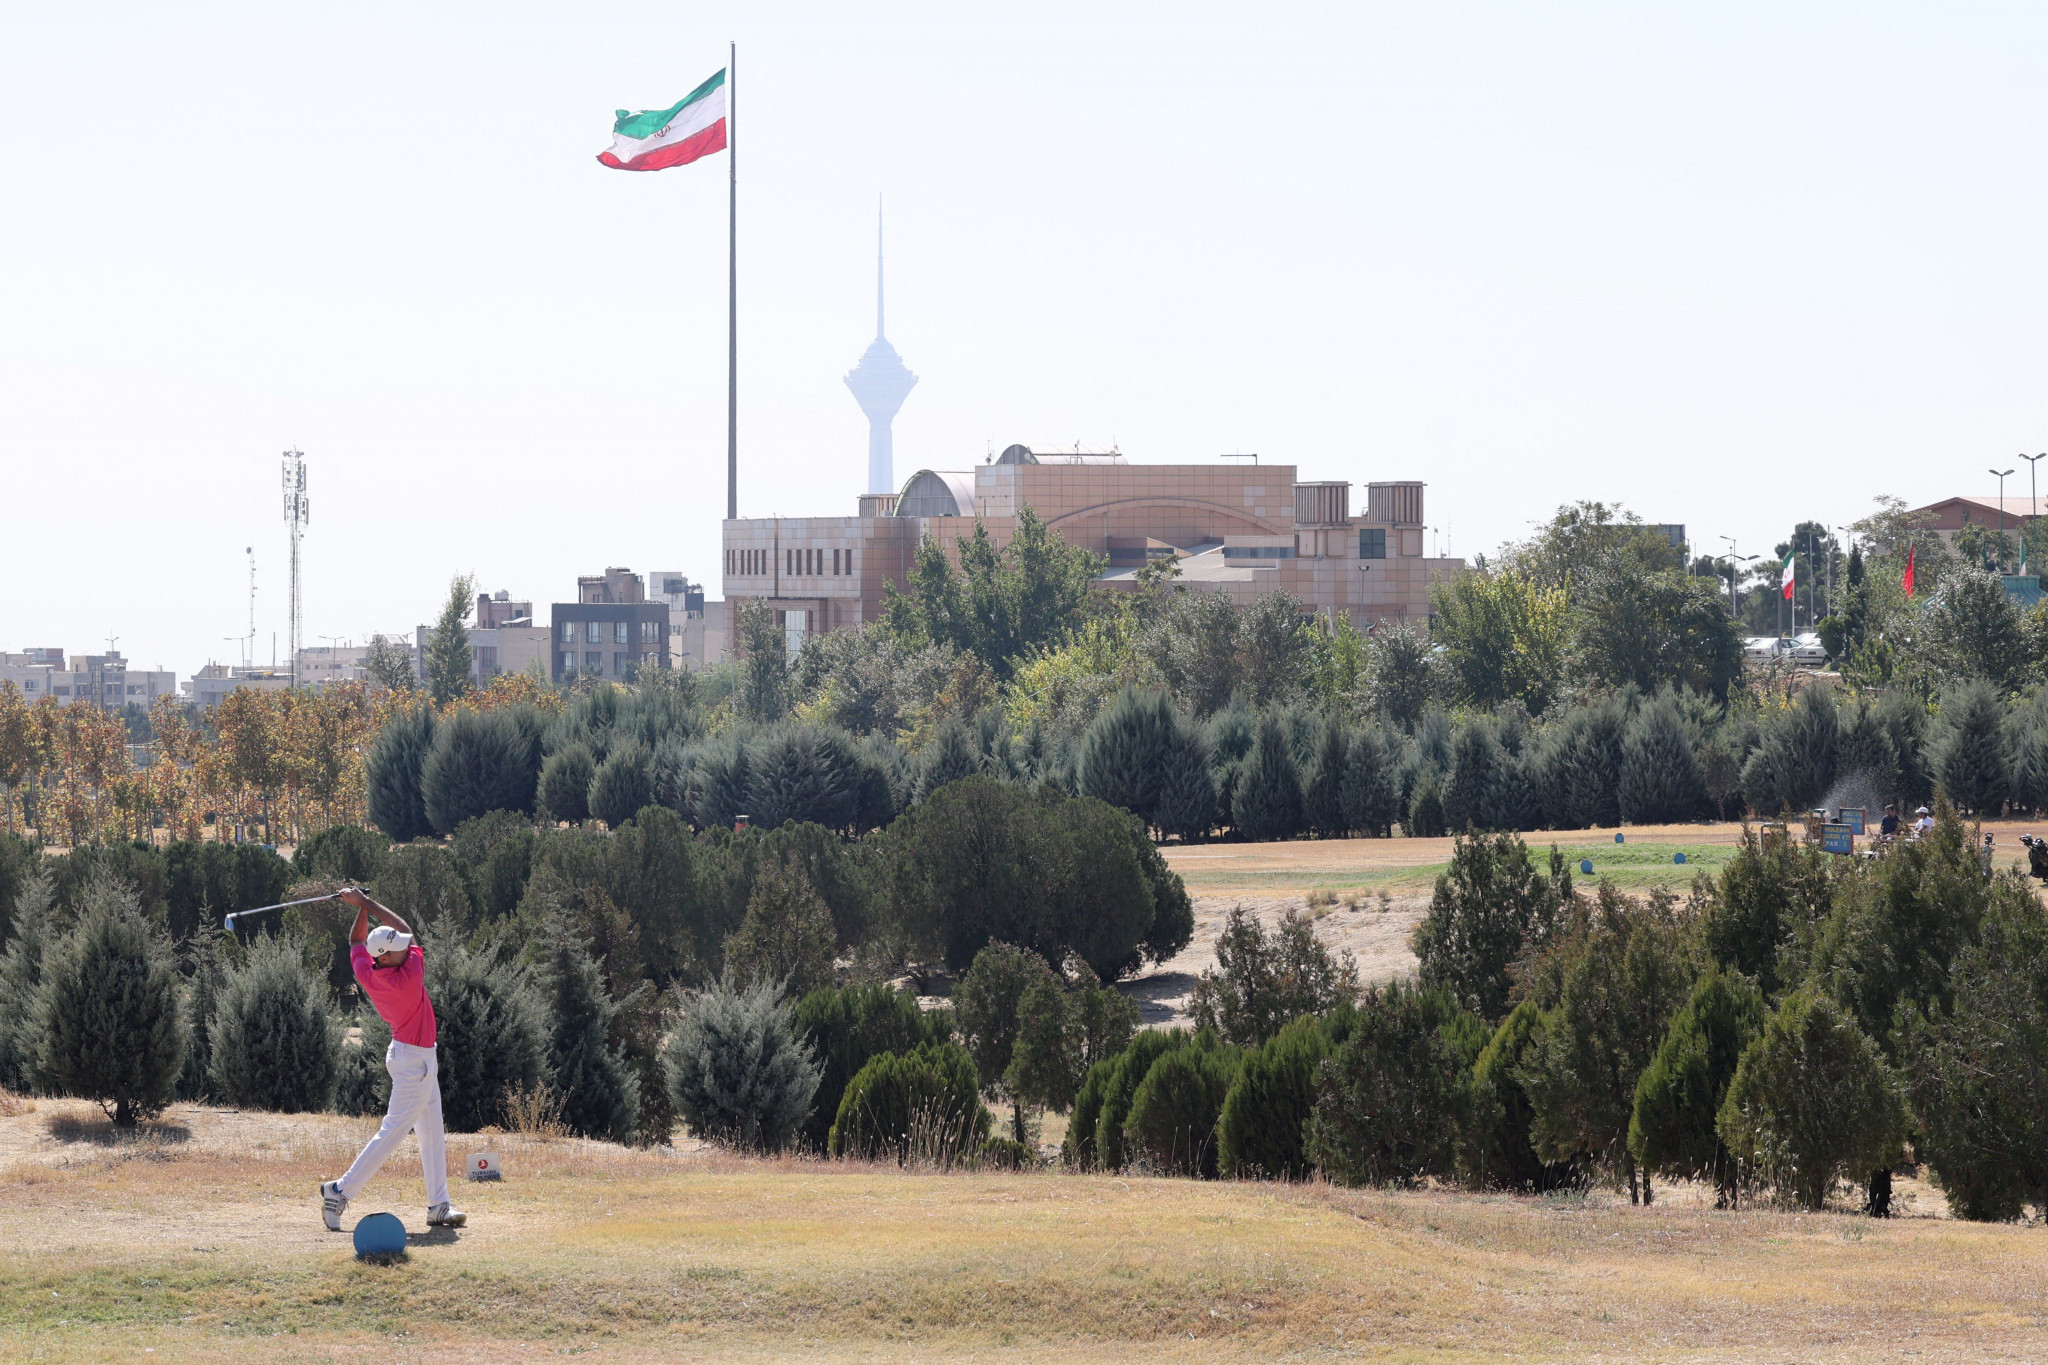 Reza Salehi Amiri has suggested Iran needs to build more golf courses to develop the sport further ©Getty Images